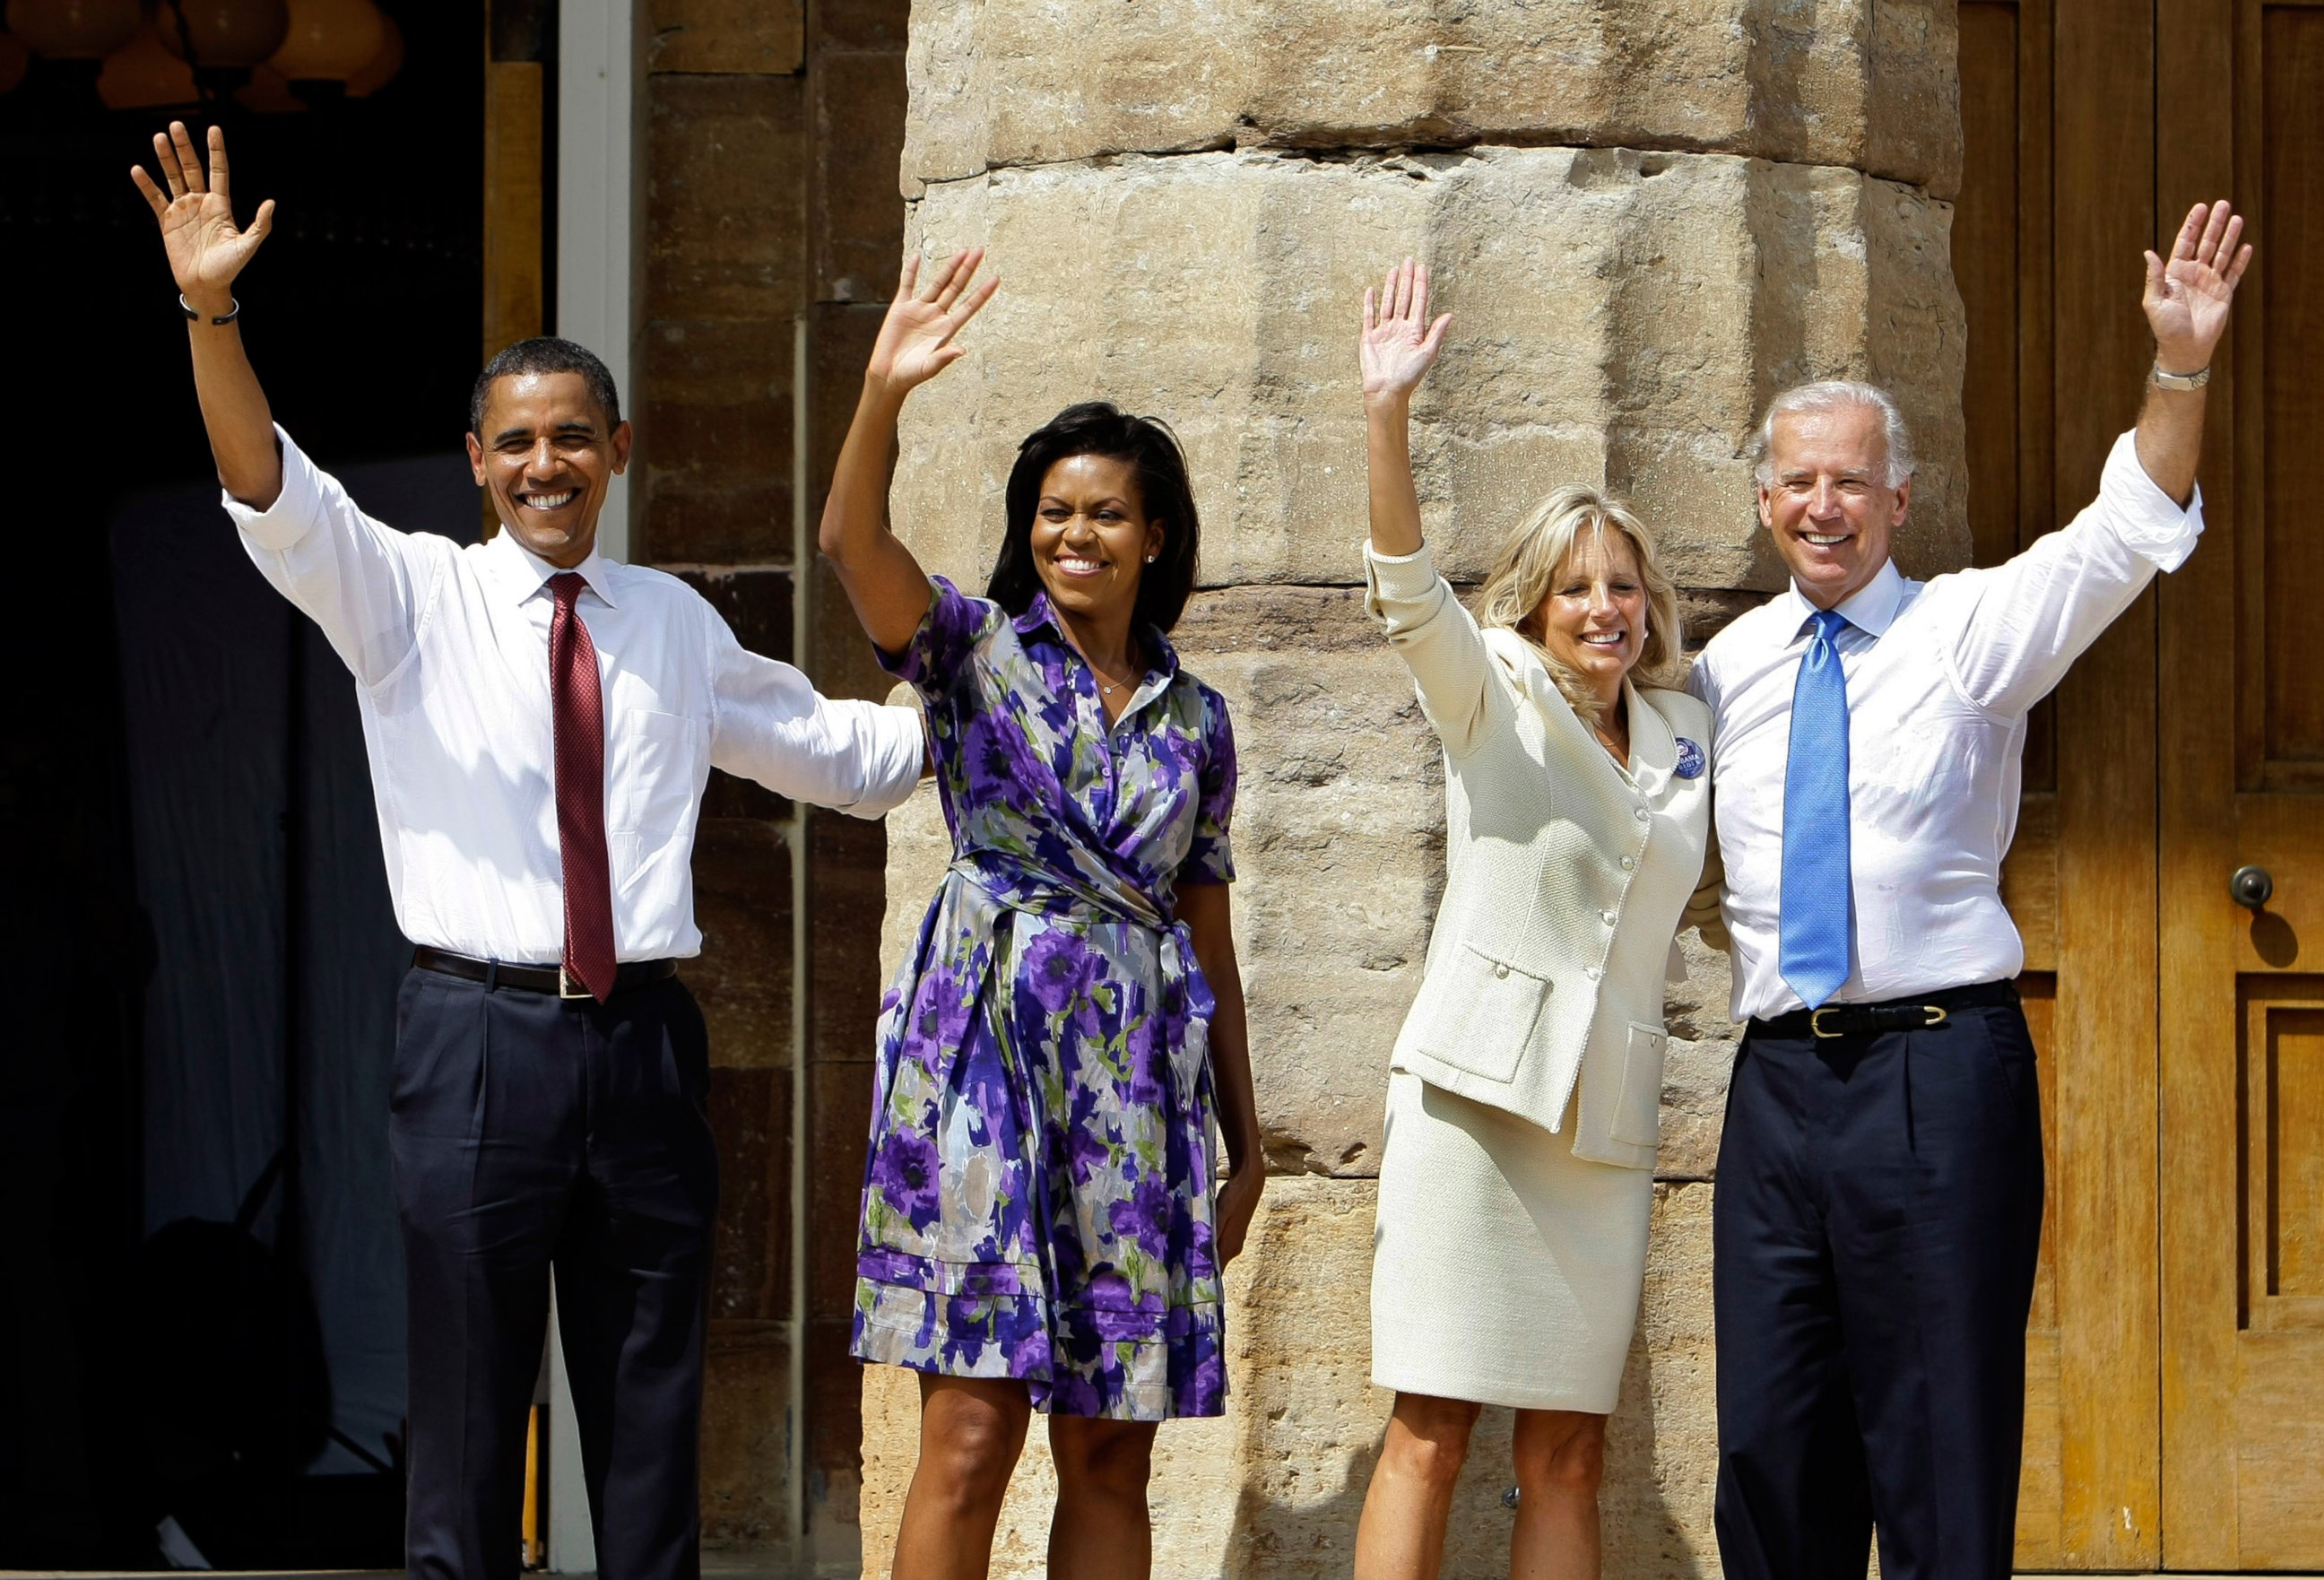 PHOTO: Democratic presidential candidate Sen. Barack Obama, left, with his wife Michelle Obama, Jill Biden, and vice presidential running mate Sen. Joe Biden, wave on the steps in front of the Old State Capitol in Springfield, Illinois, Aug. 23, 2008.